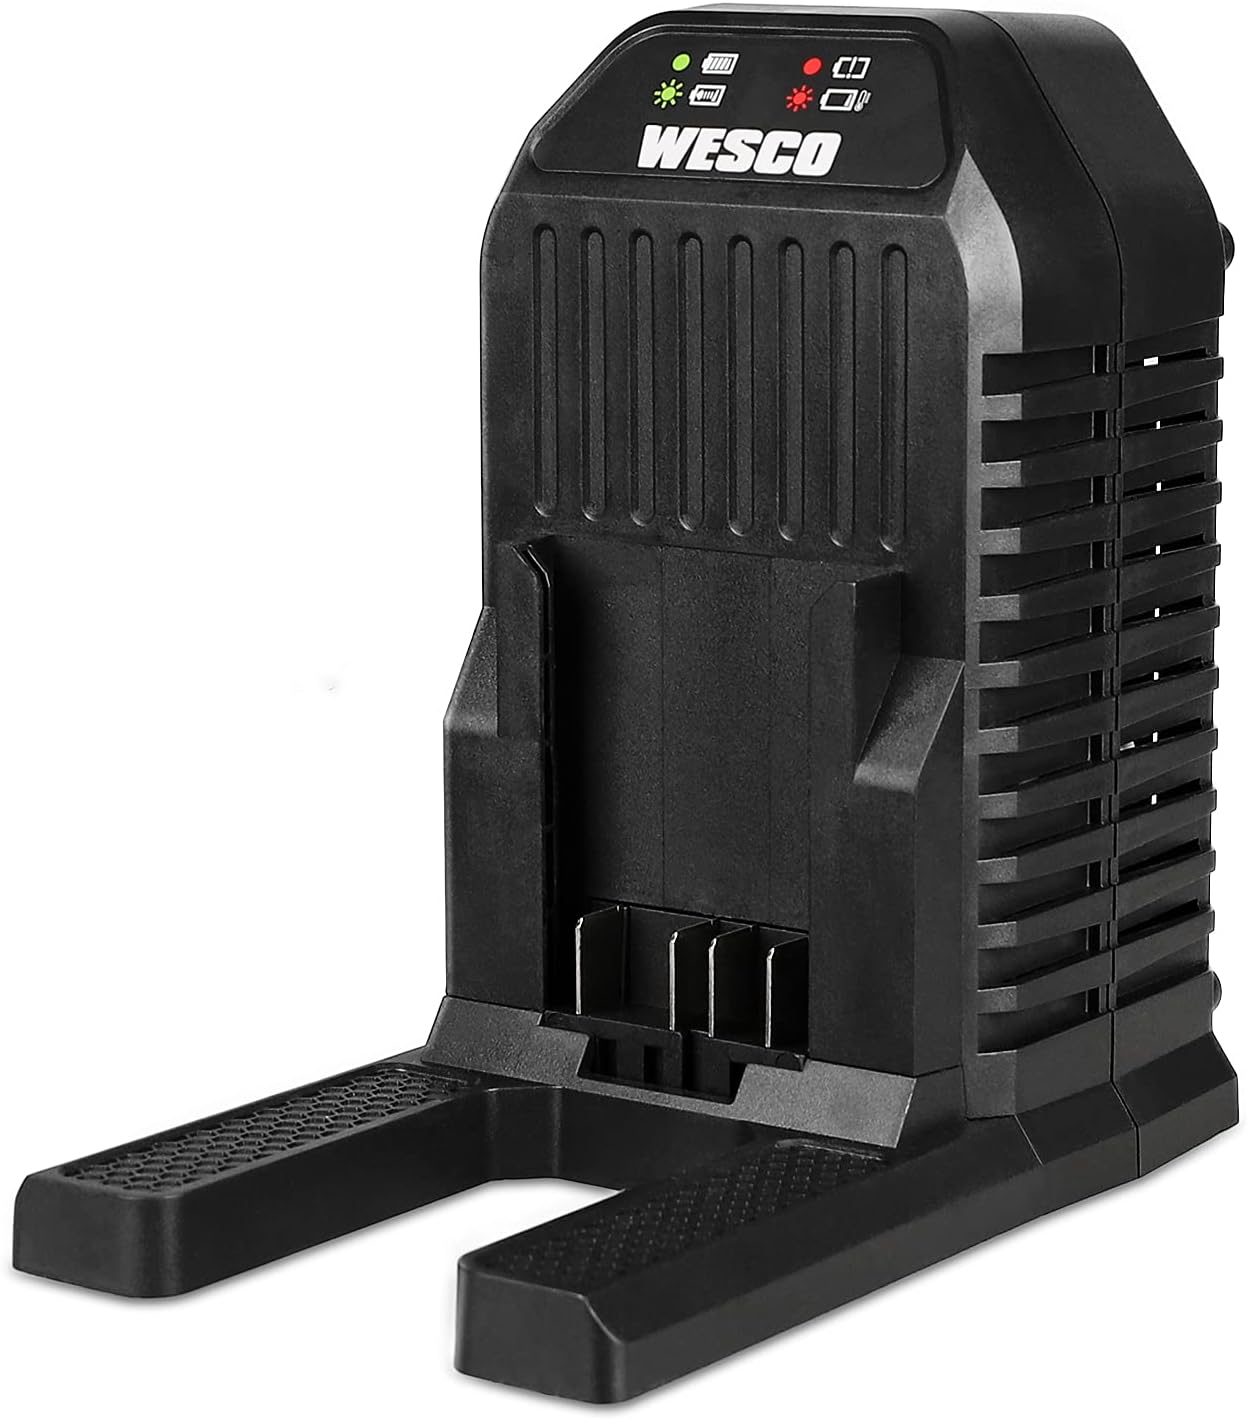 WESCO 60V Fast Charger, Rapid Charger Compatible WS9982 WS9983 60V MAX Lithium Battery/WS9984U